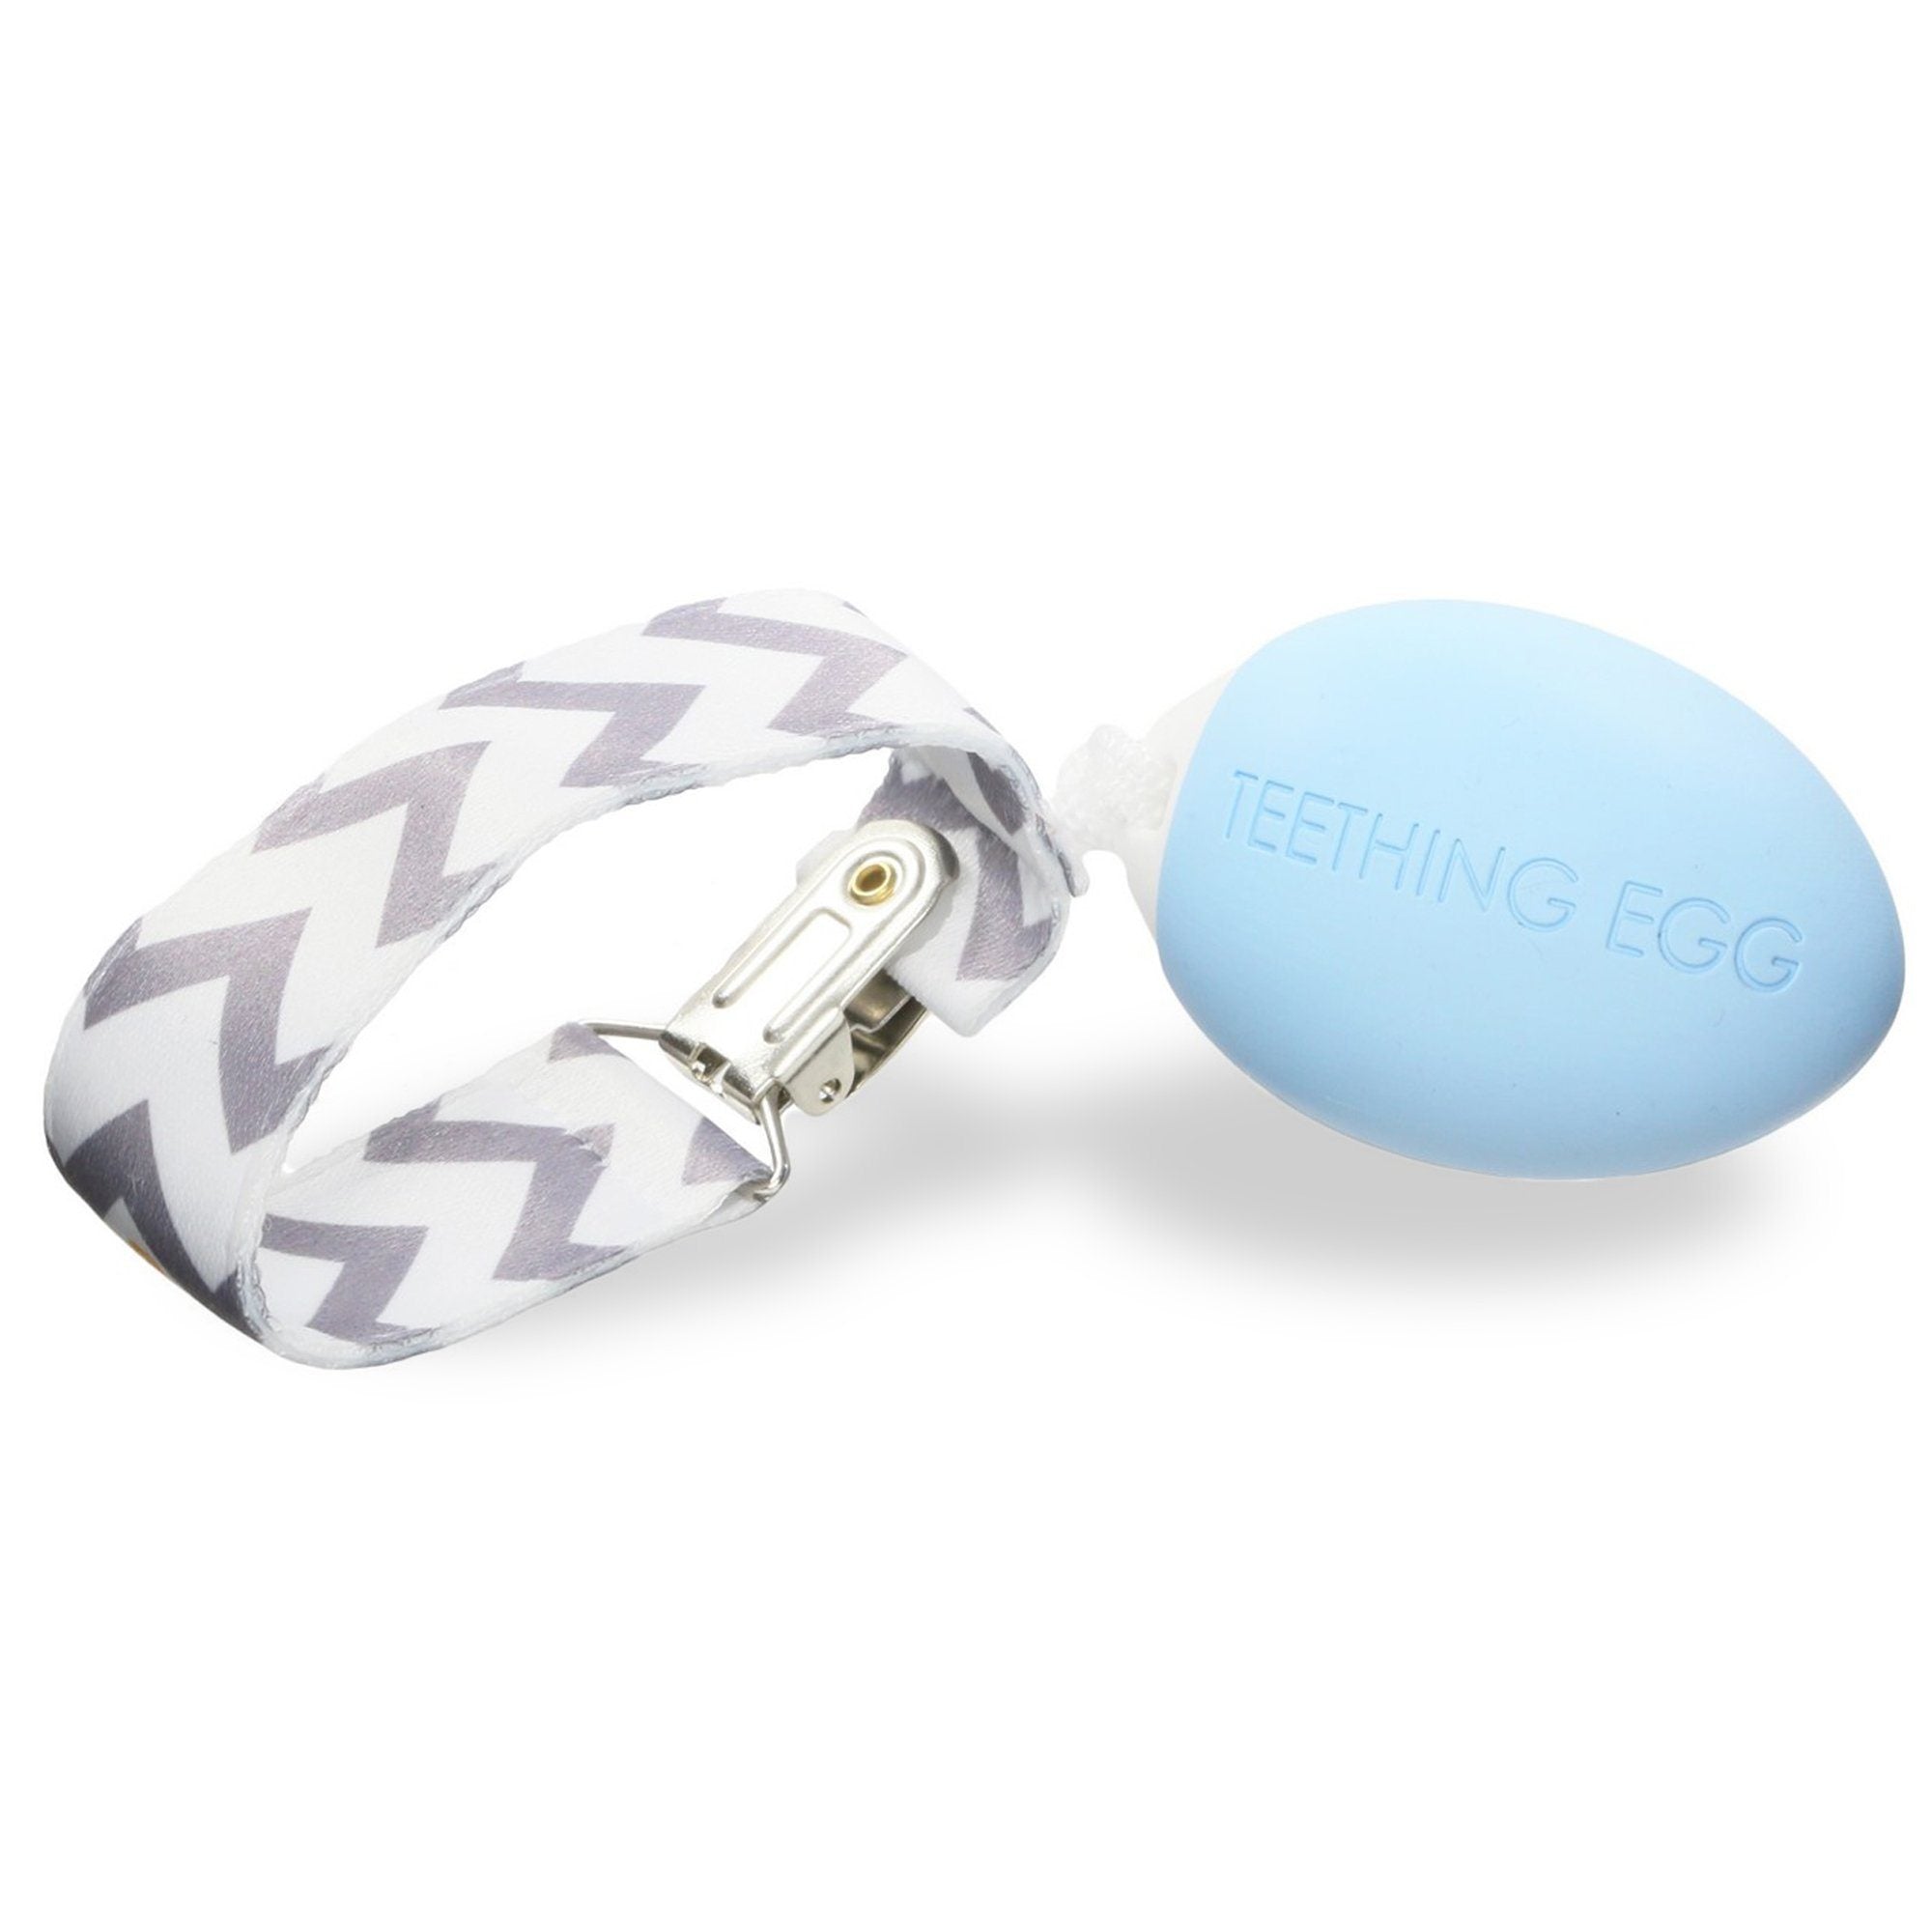 The Teething Egg - Baby Blue